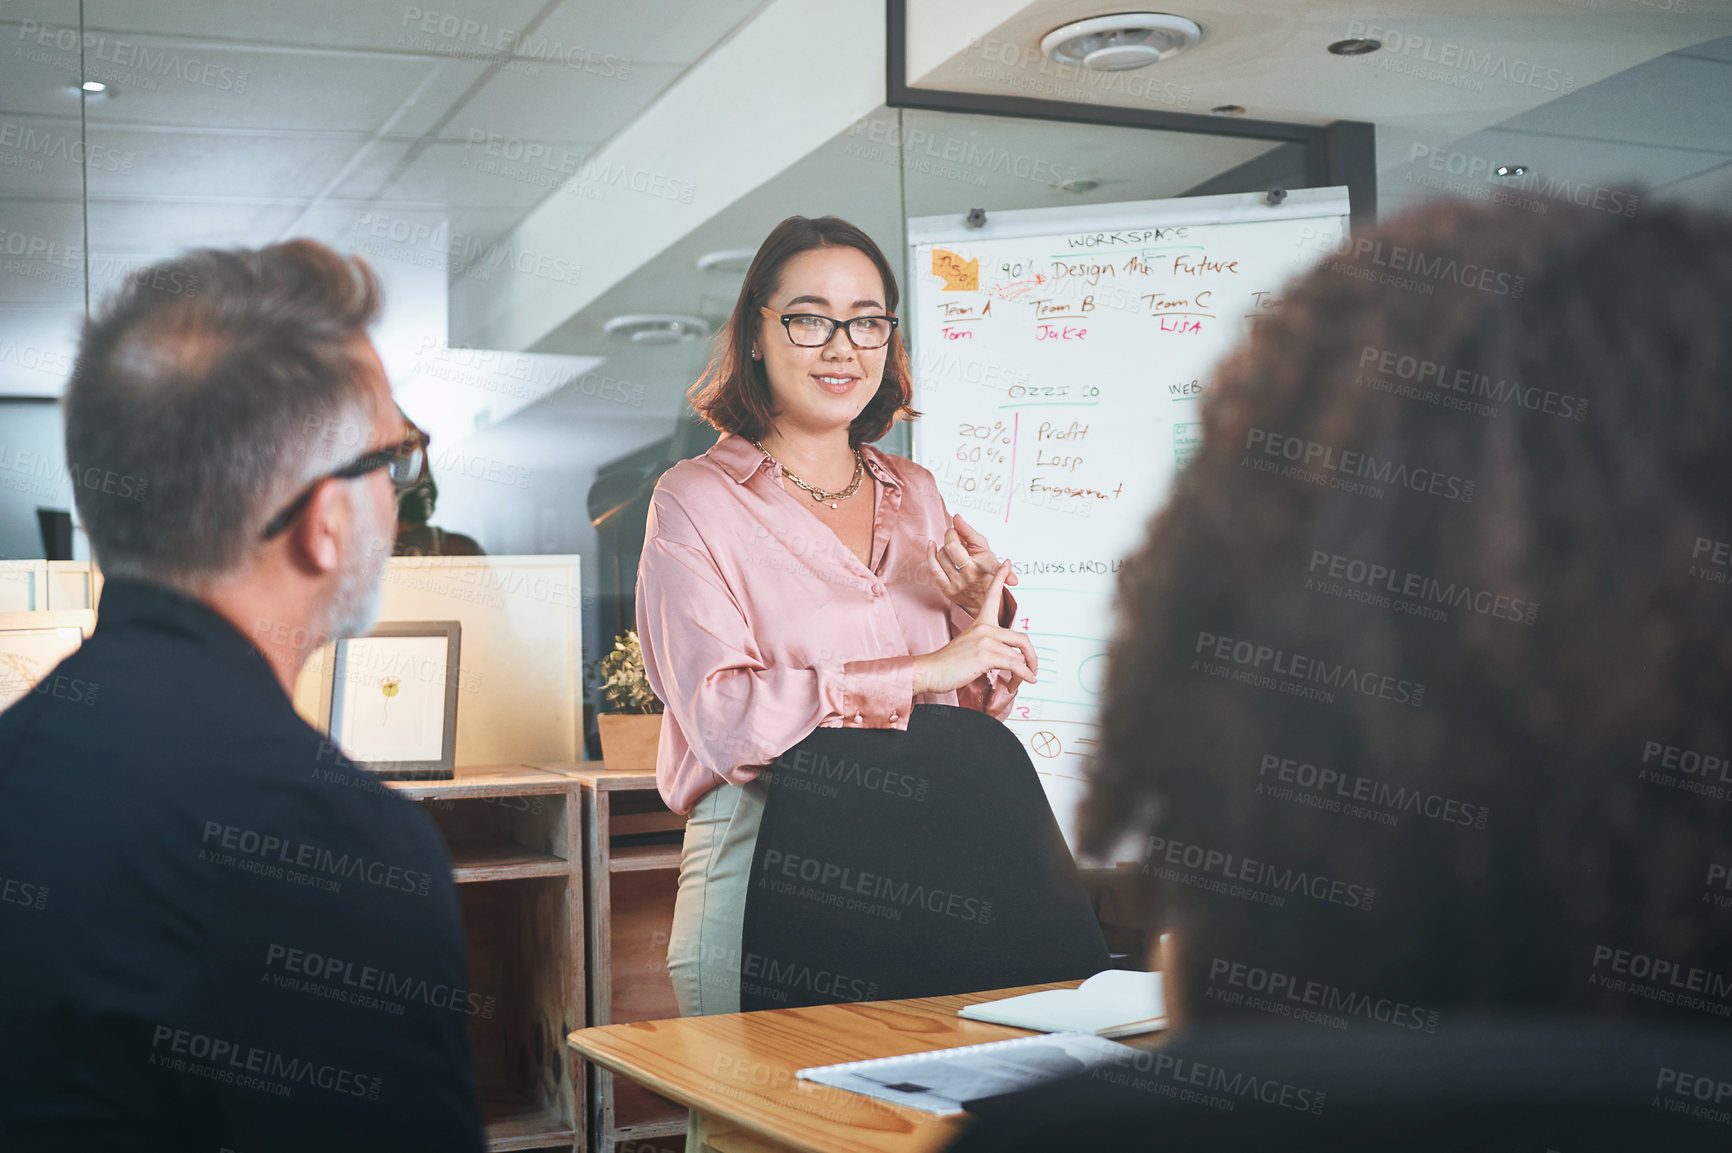 Buy stock photo Shot of a young businesswoman delivering a presentation to her coworkers in the boardroom of a modern office